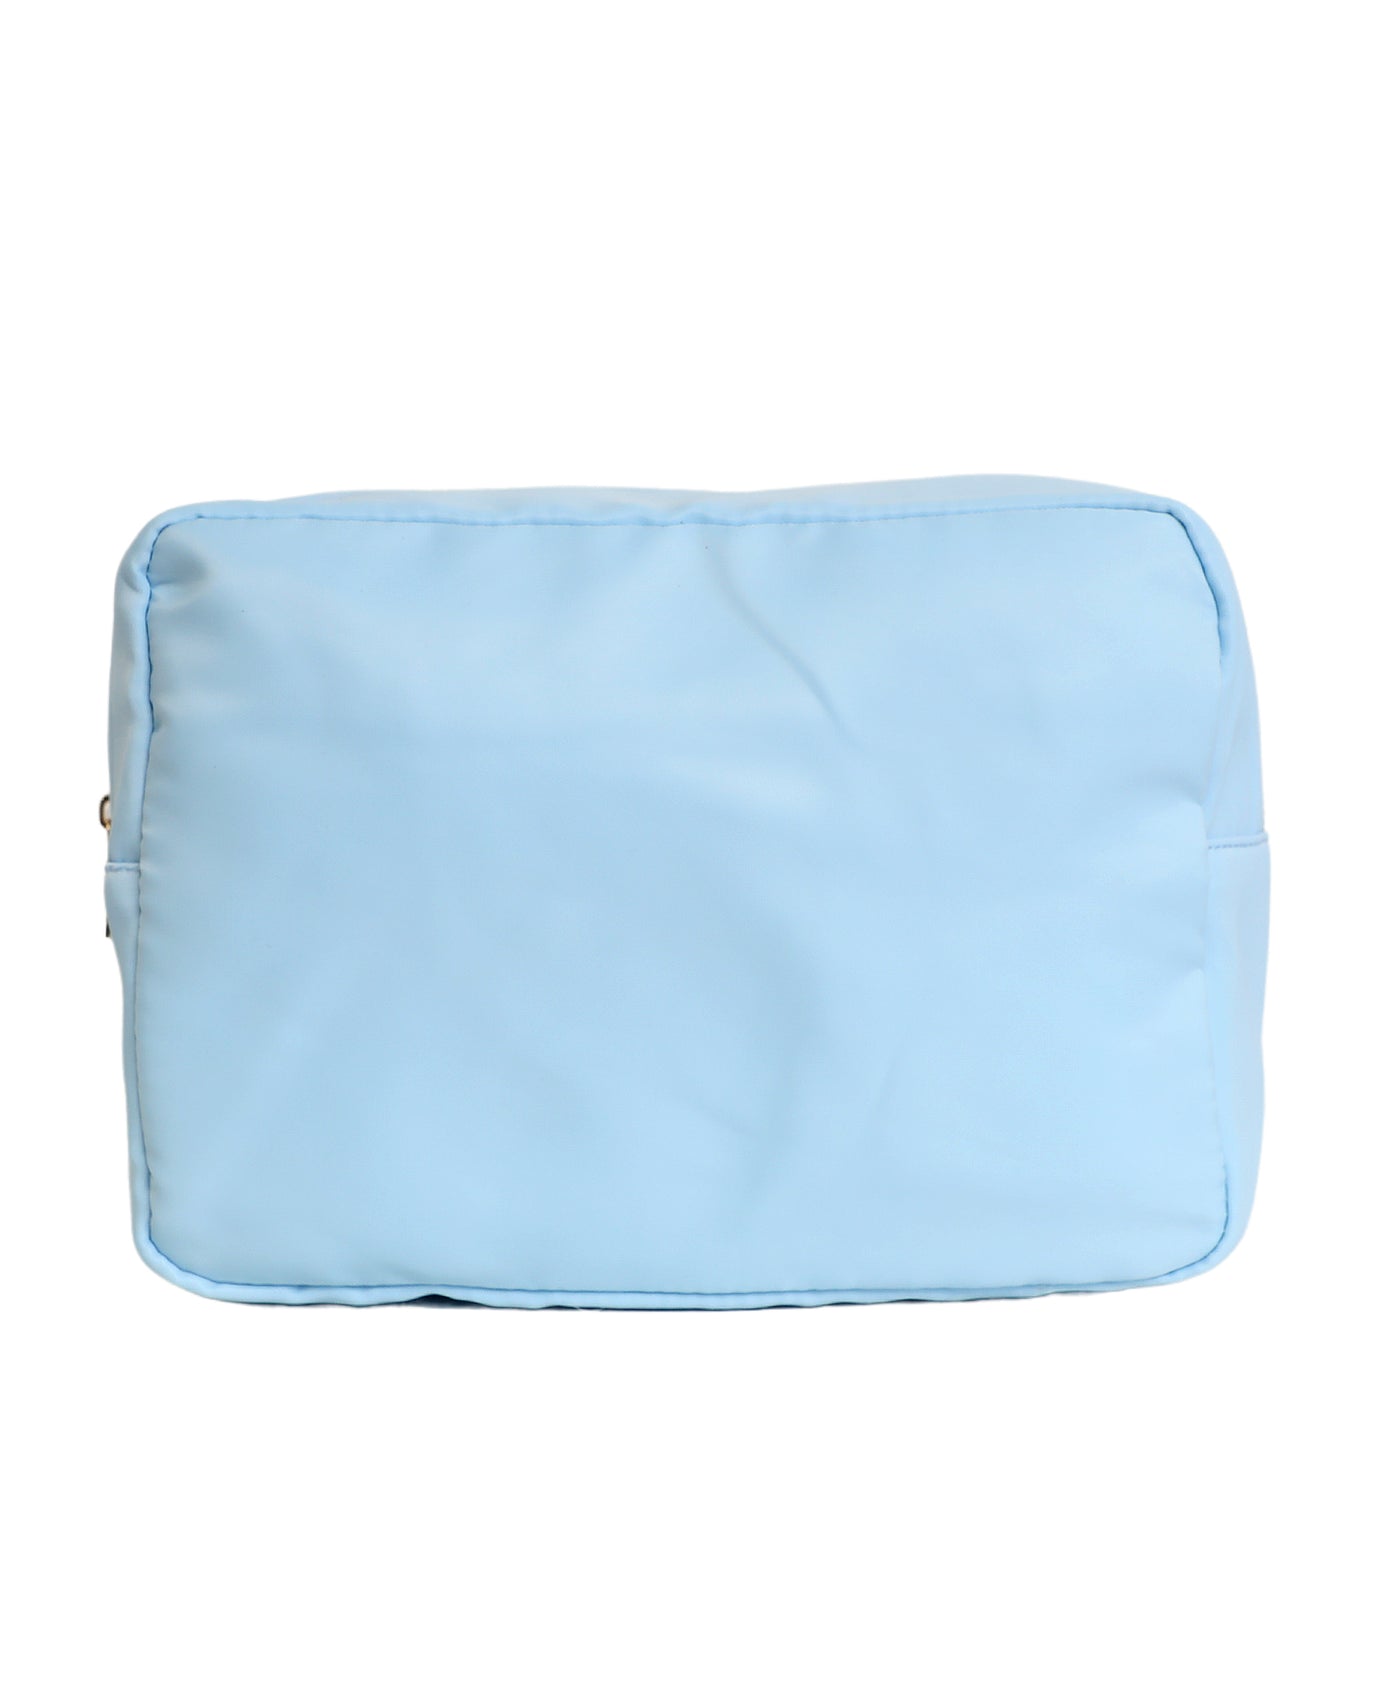 Sky Extra Large Pouch image 1